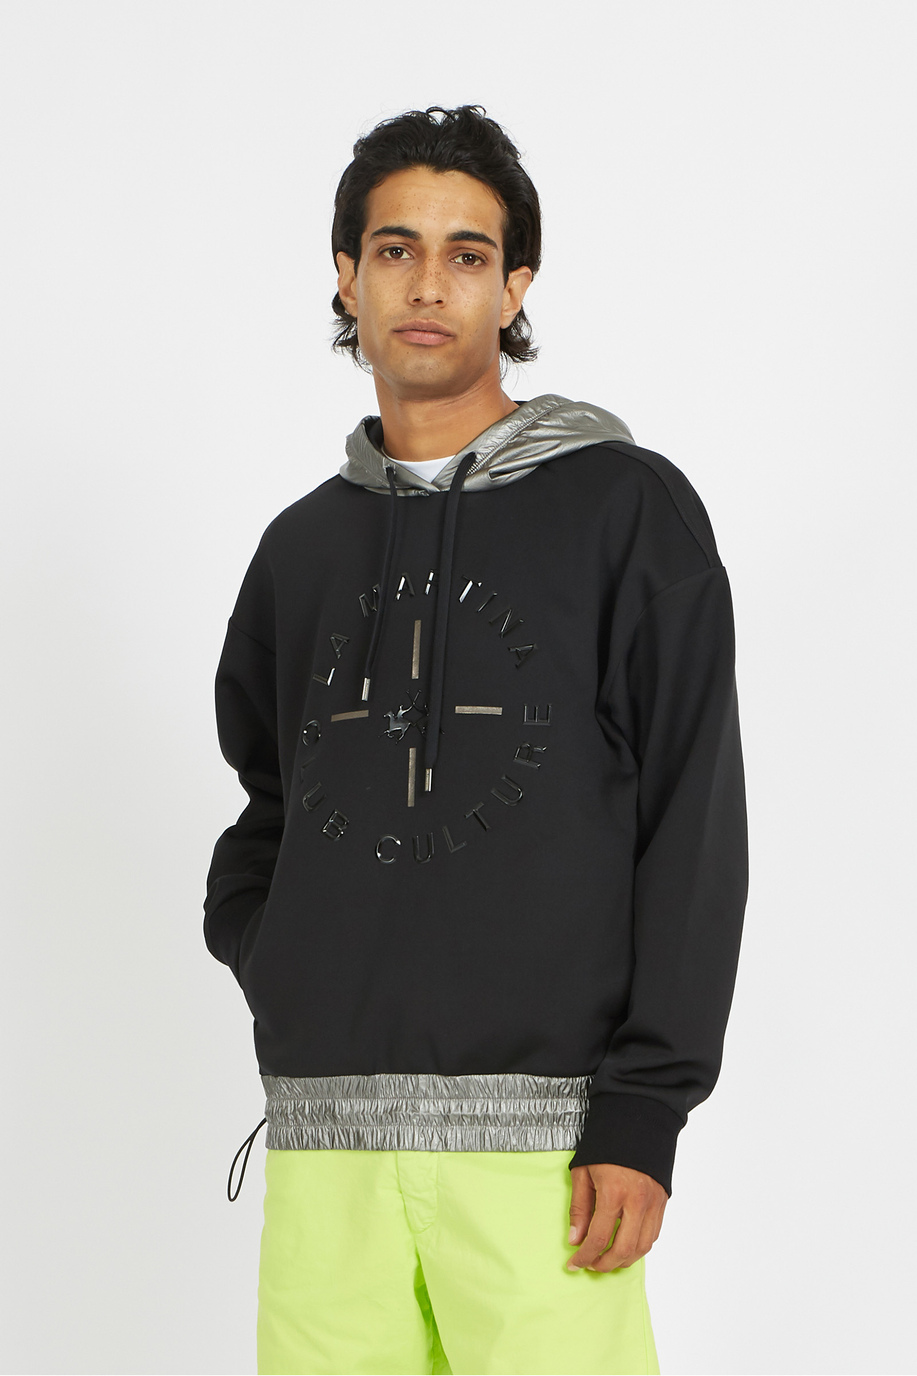 Long-sleeves man fleece with hoodie cotton-mixed over fit  -  Vonnie - Jet Set | La Martina - Official Online Shop